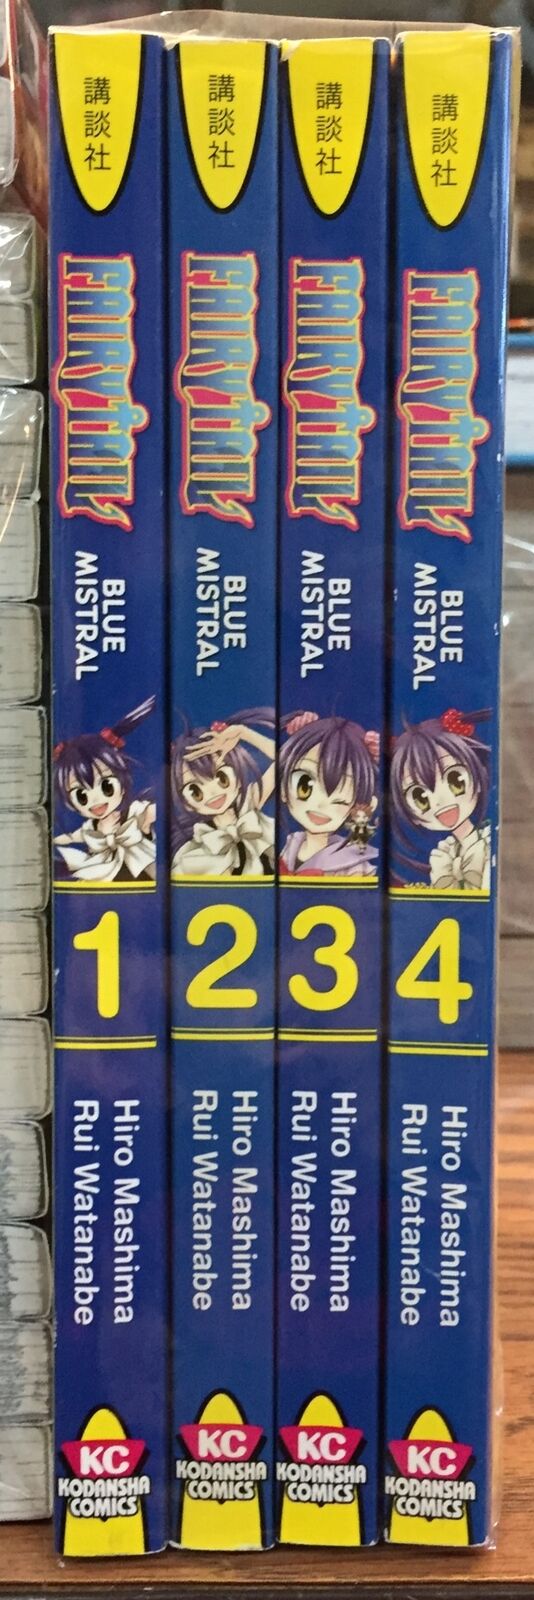 Fairy Tail: Blue Mistral Complete Set